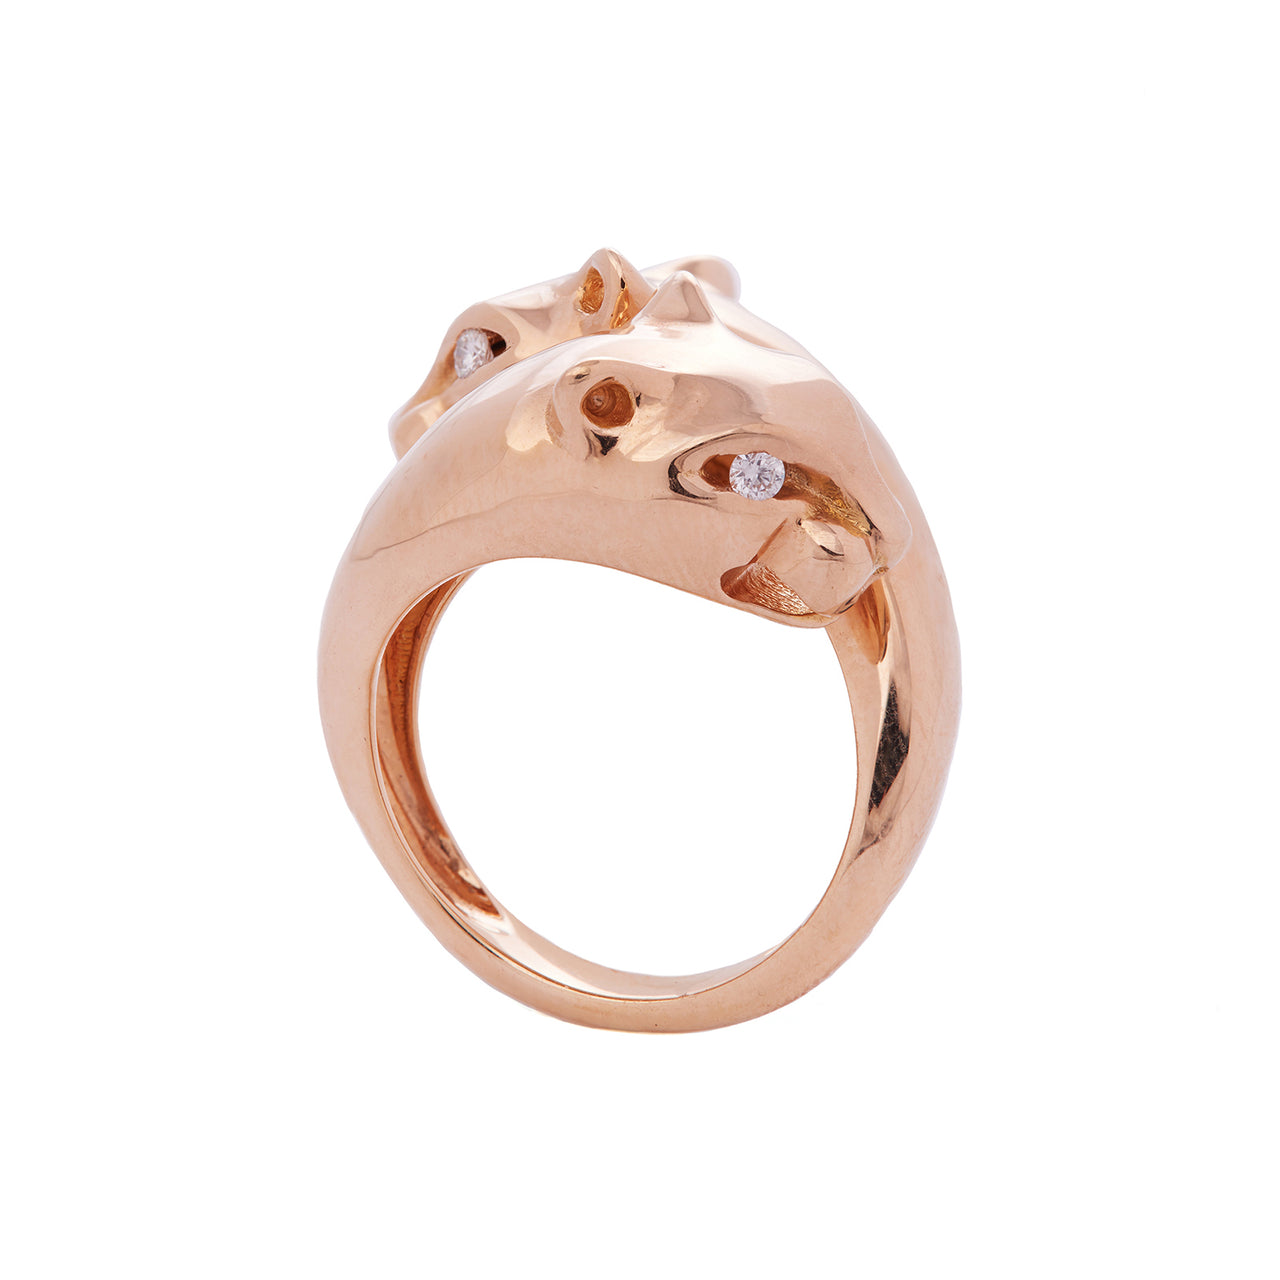 Passionate Panther Ring with Diamonds